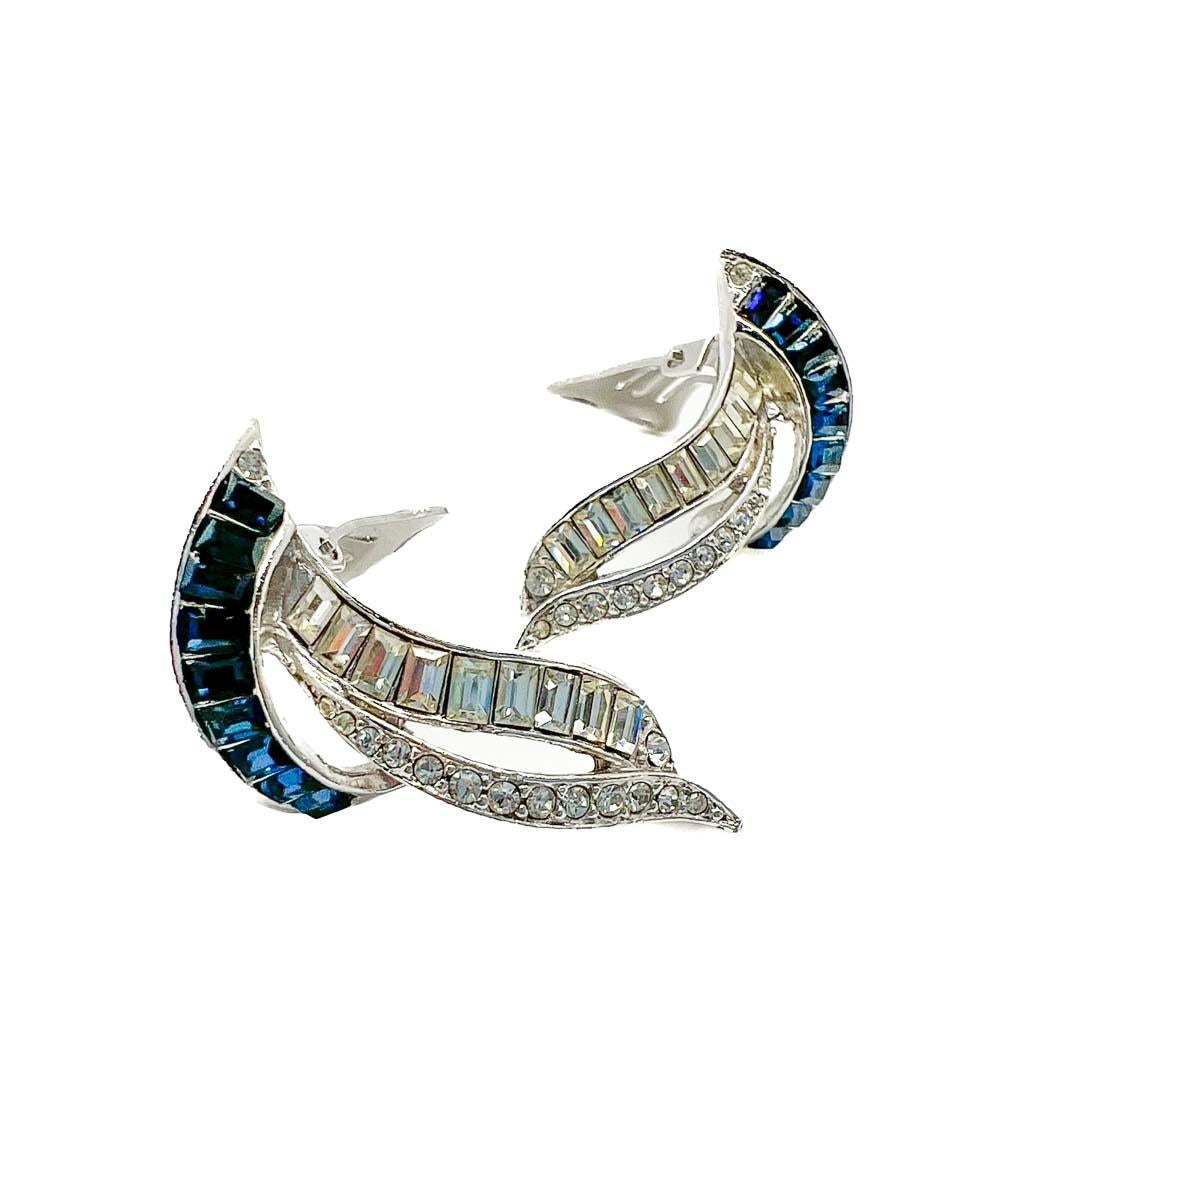 A pair of Vintage Sapphire Paste Swoosh Earrings. A delightful design, quite possibly Boucher featuring sapphire and white crystals in fancy cut baguette stones and chatons. Inspired by the Art Deco period the design and craftmanship, let alone the